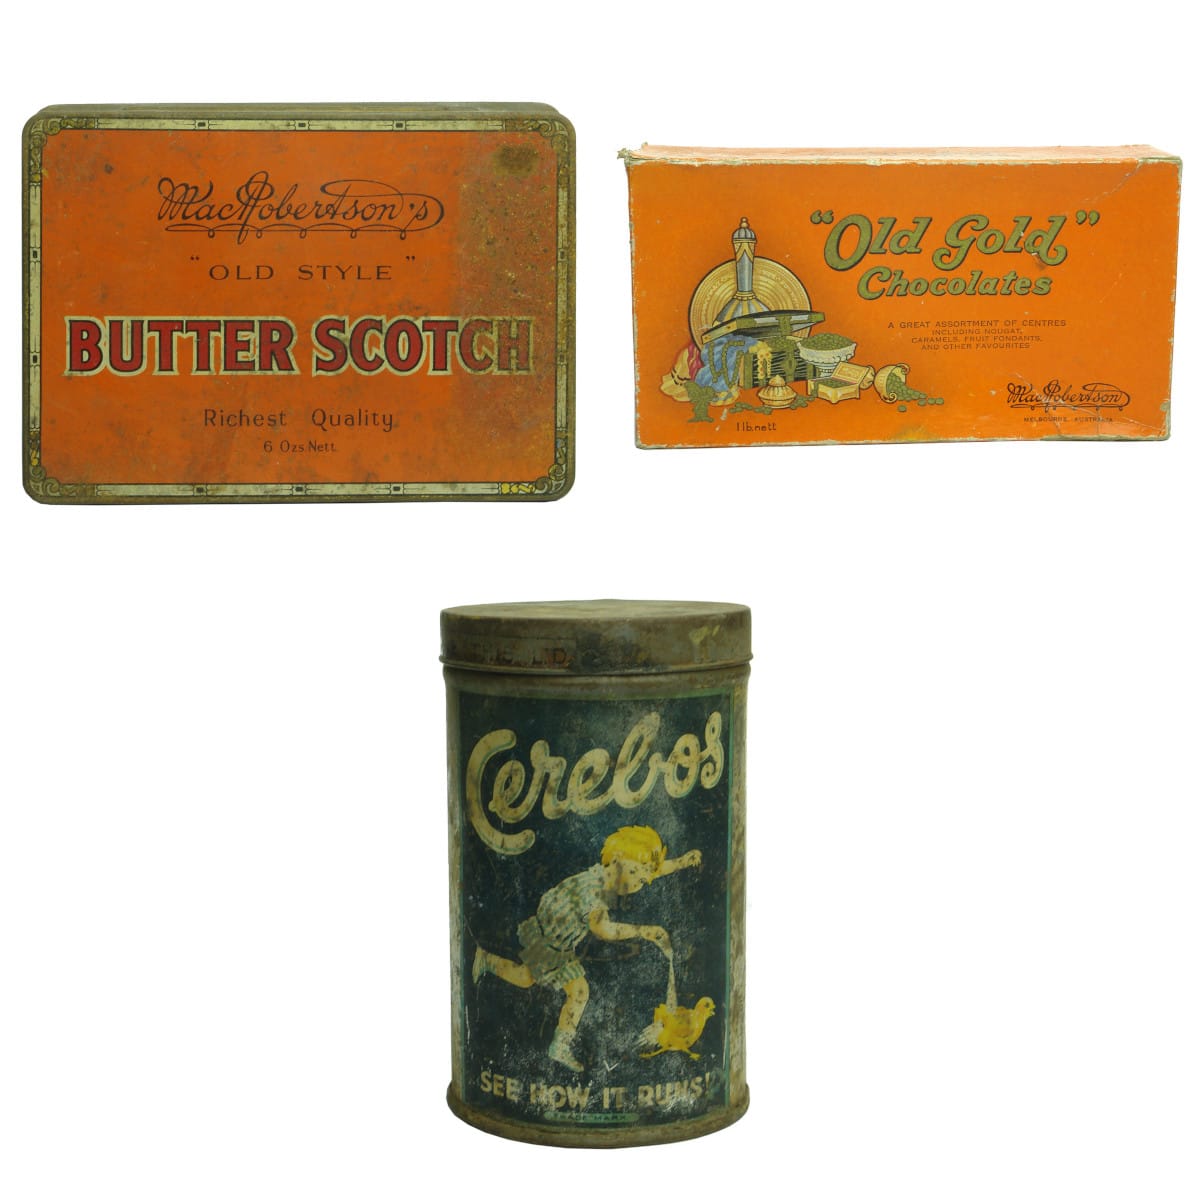 3 Items. 2 Tins & Box. MacRobertson's "Old Style" Butter Scotch Tin. 6 oz. Box. MacRobertson "Old Gold" Chocolates 1 Pound Cardboard Box. Cerebos Table Salt.